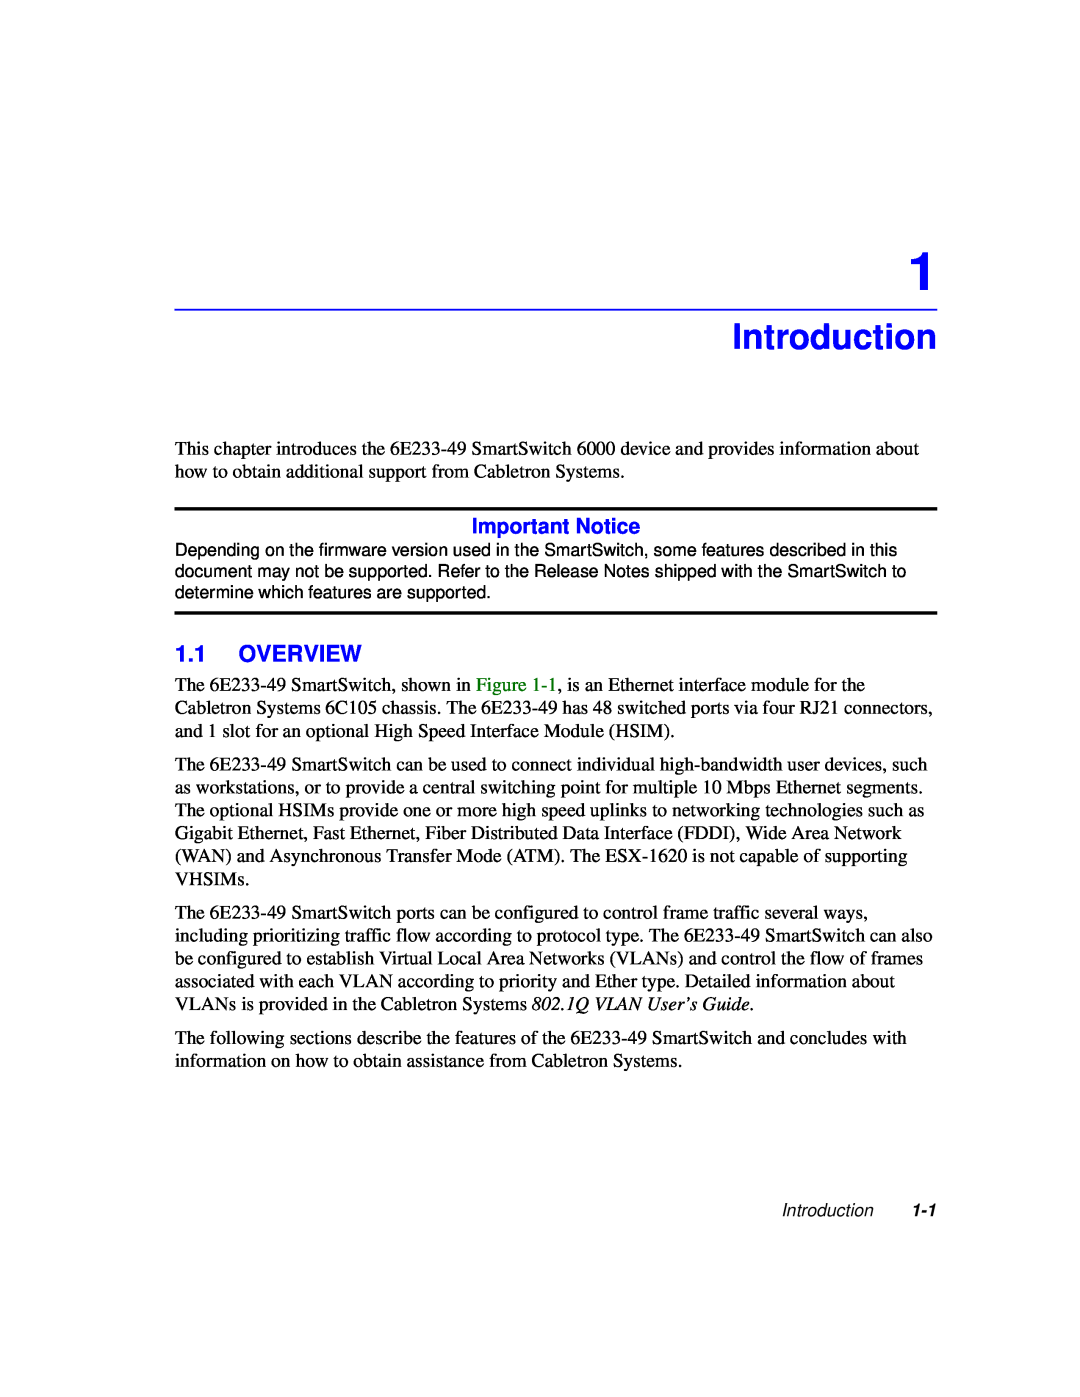 Cabletron Systems 6000 manual Introduction, Overview, Important Notice 